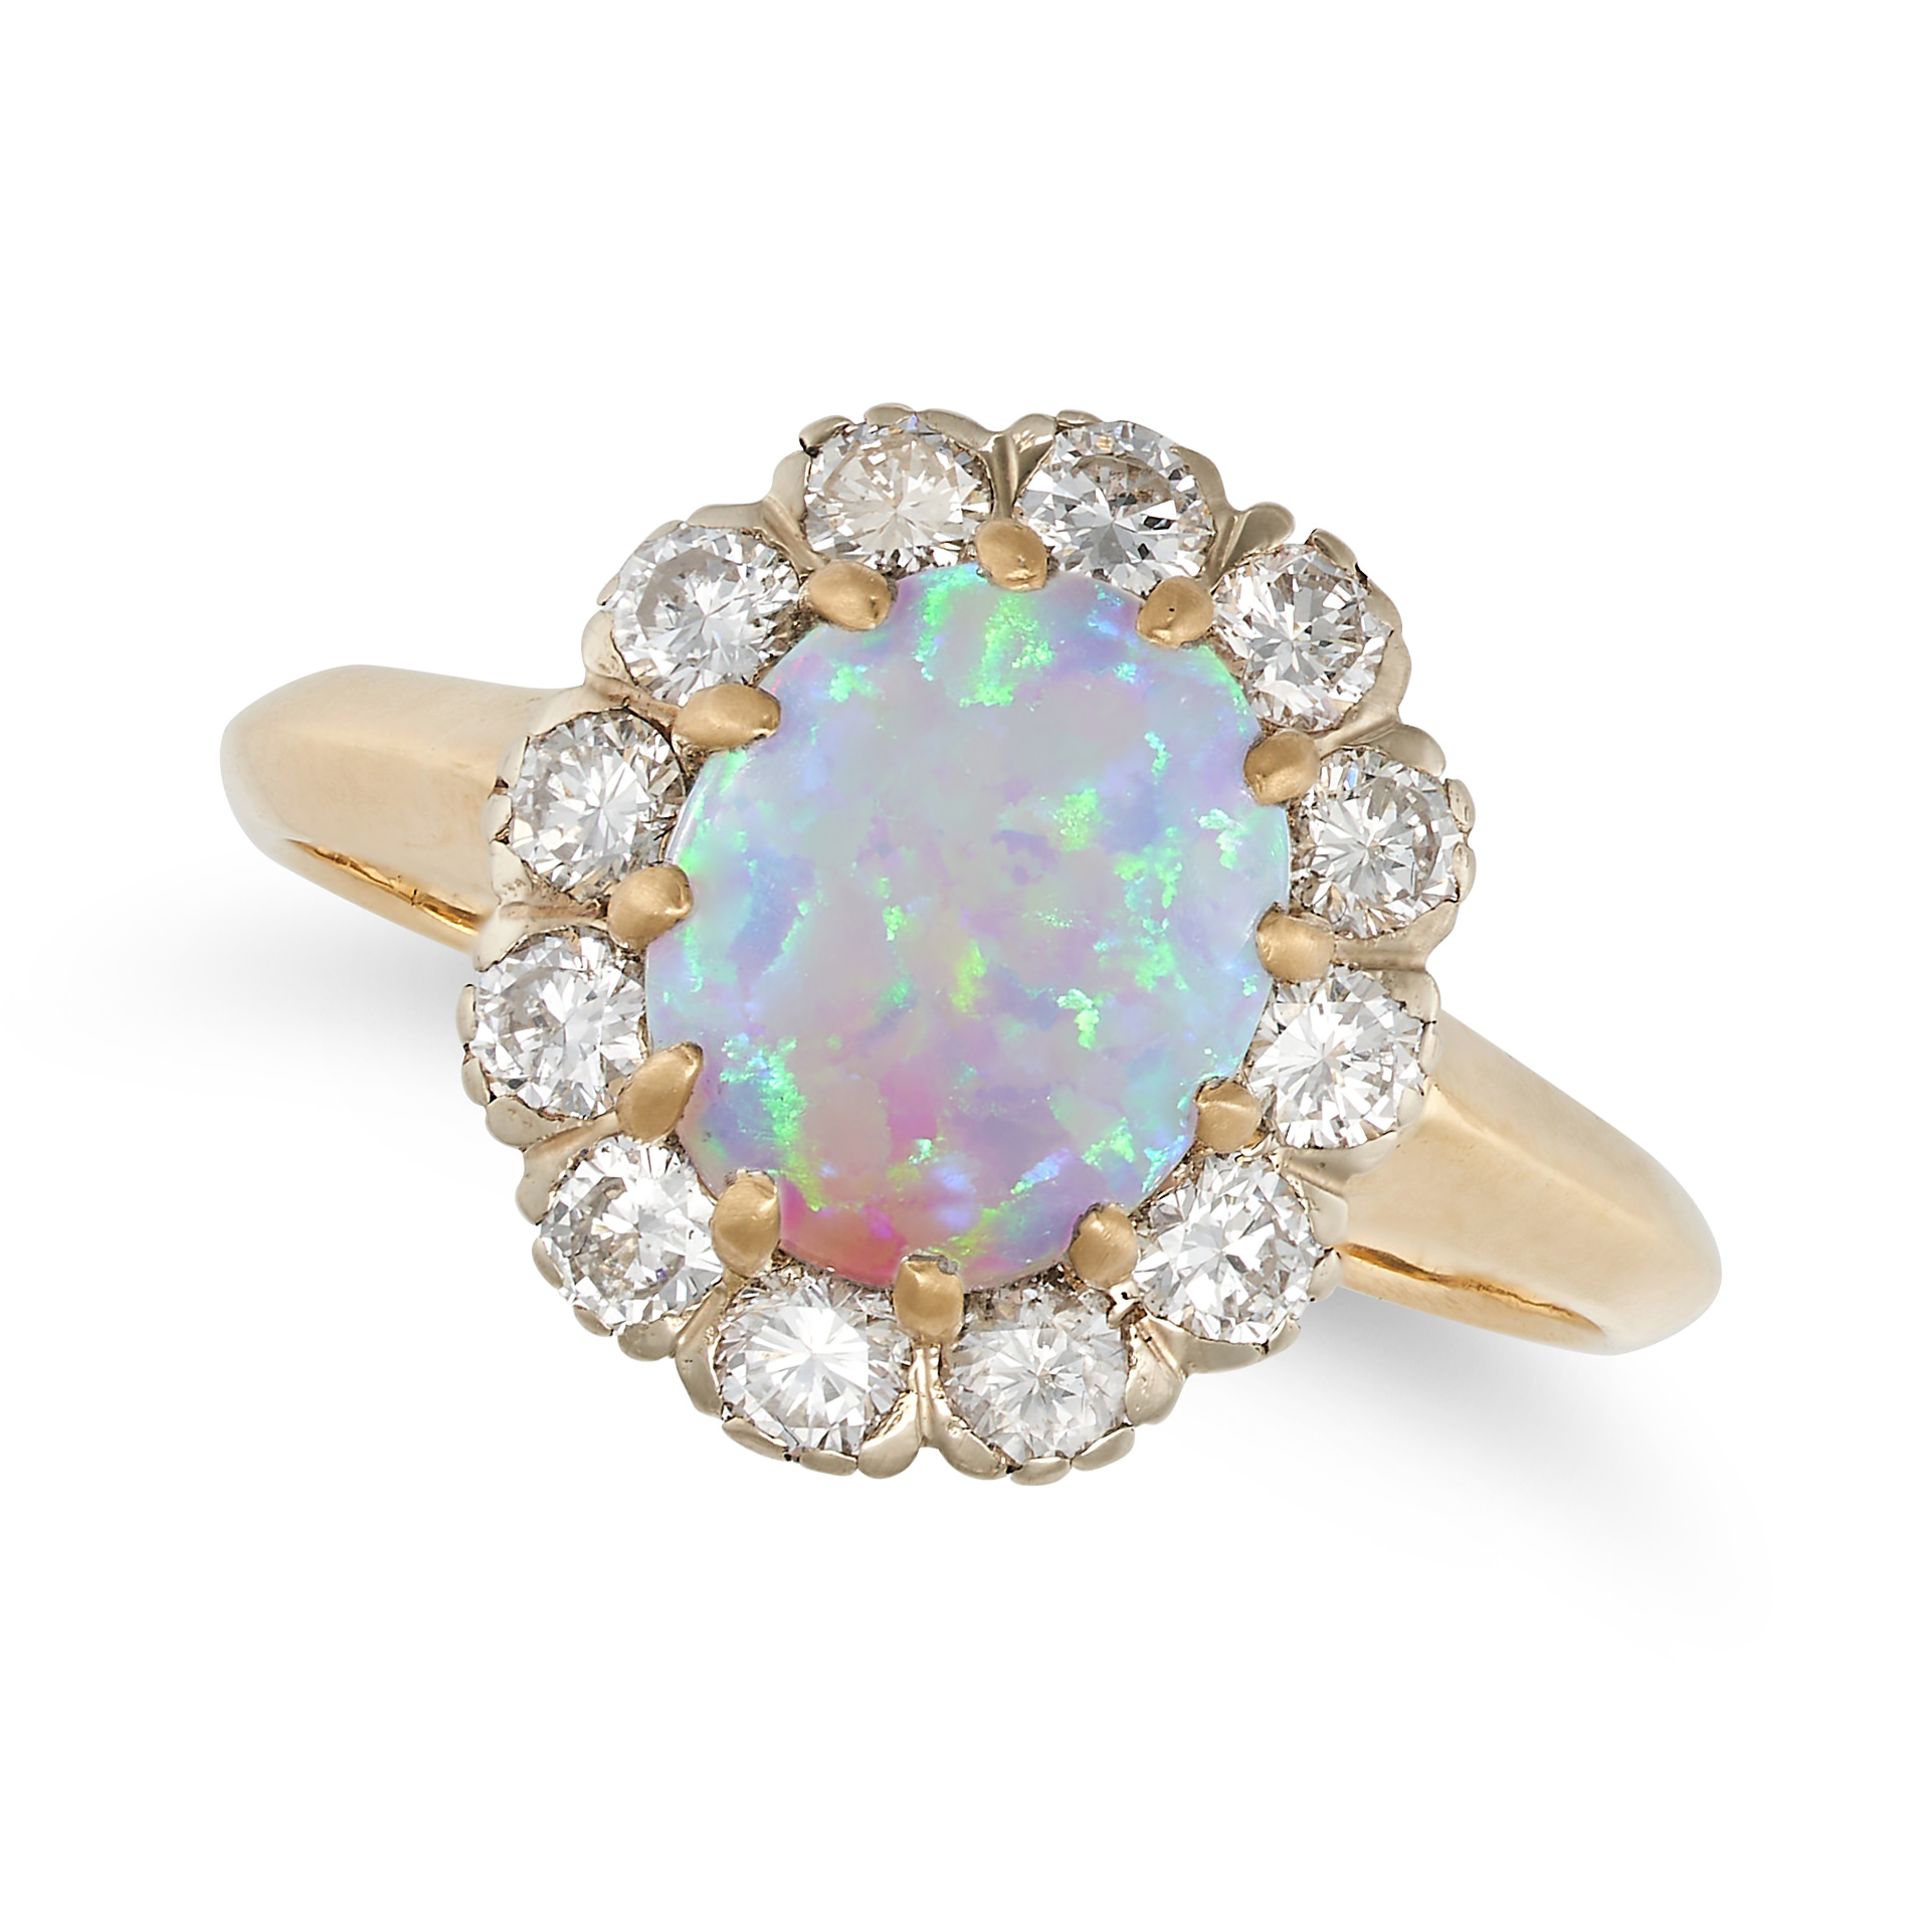 AN OPAL AND DIAMOND CLUSTER RING in yellow gold, set with an oval cabochon opal in a cluster of r...